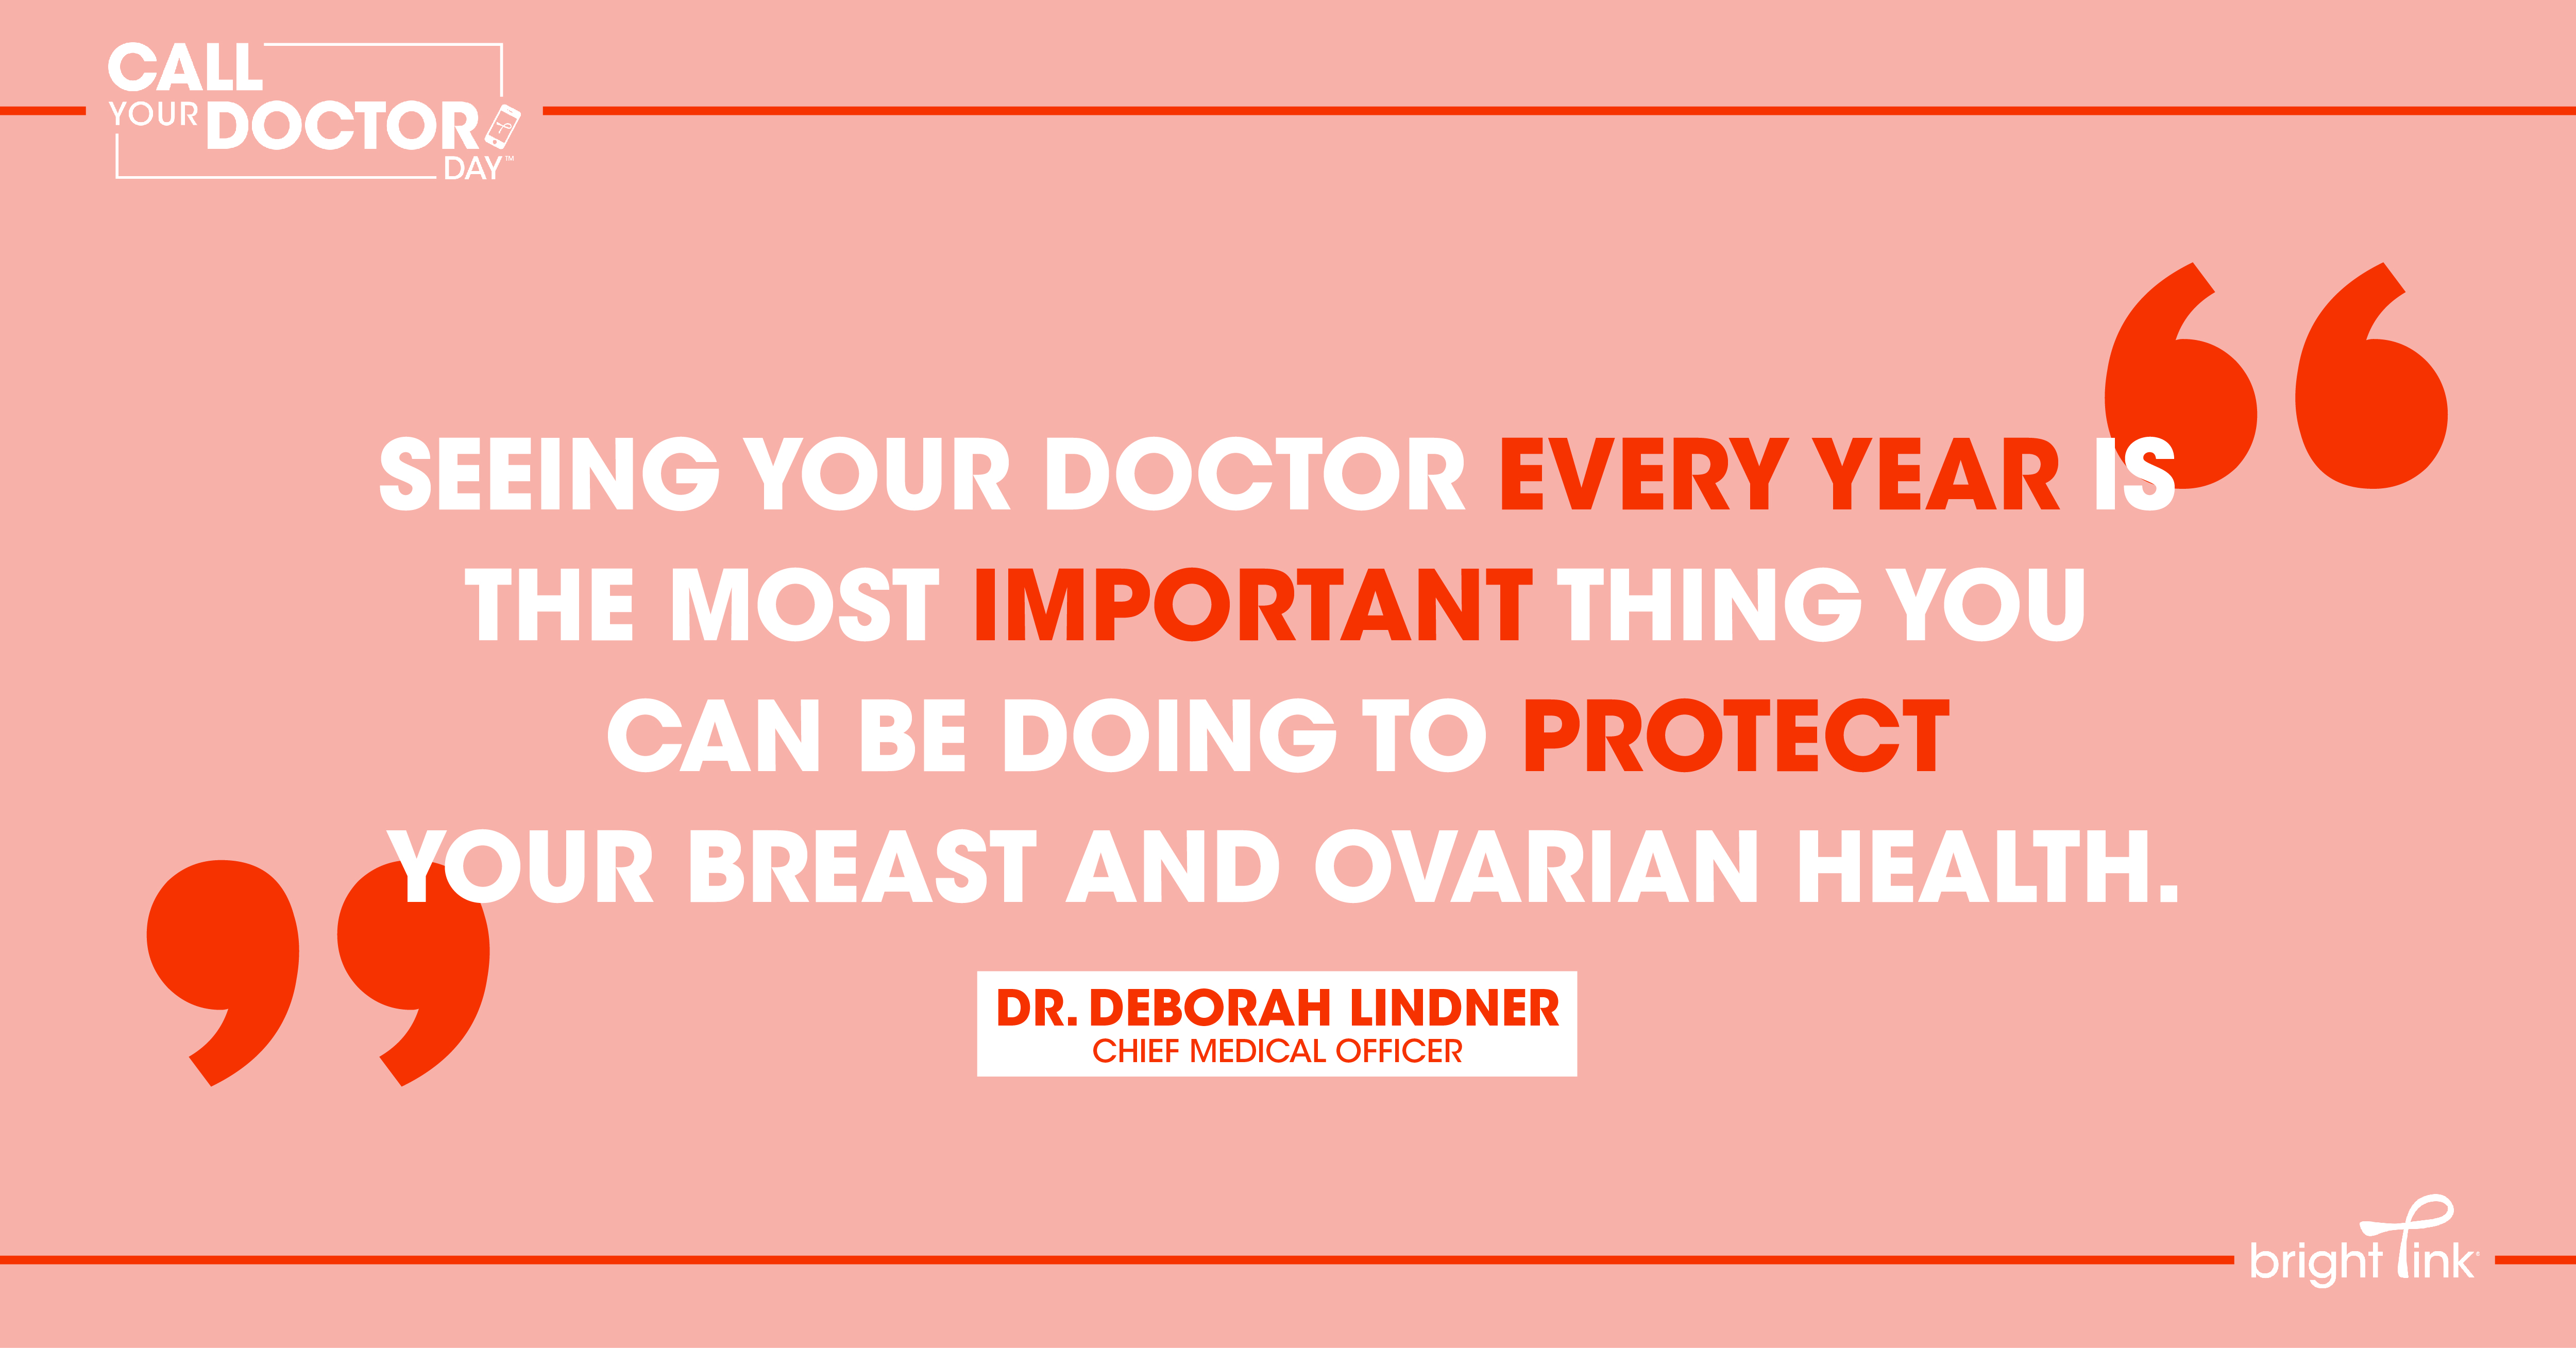 It's important to schedule your well-woman exam every year, even when you're healthy.